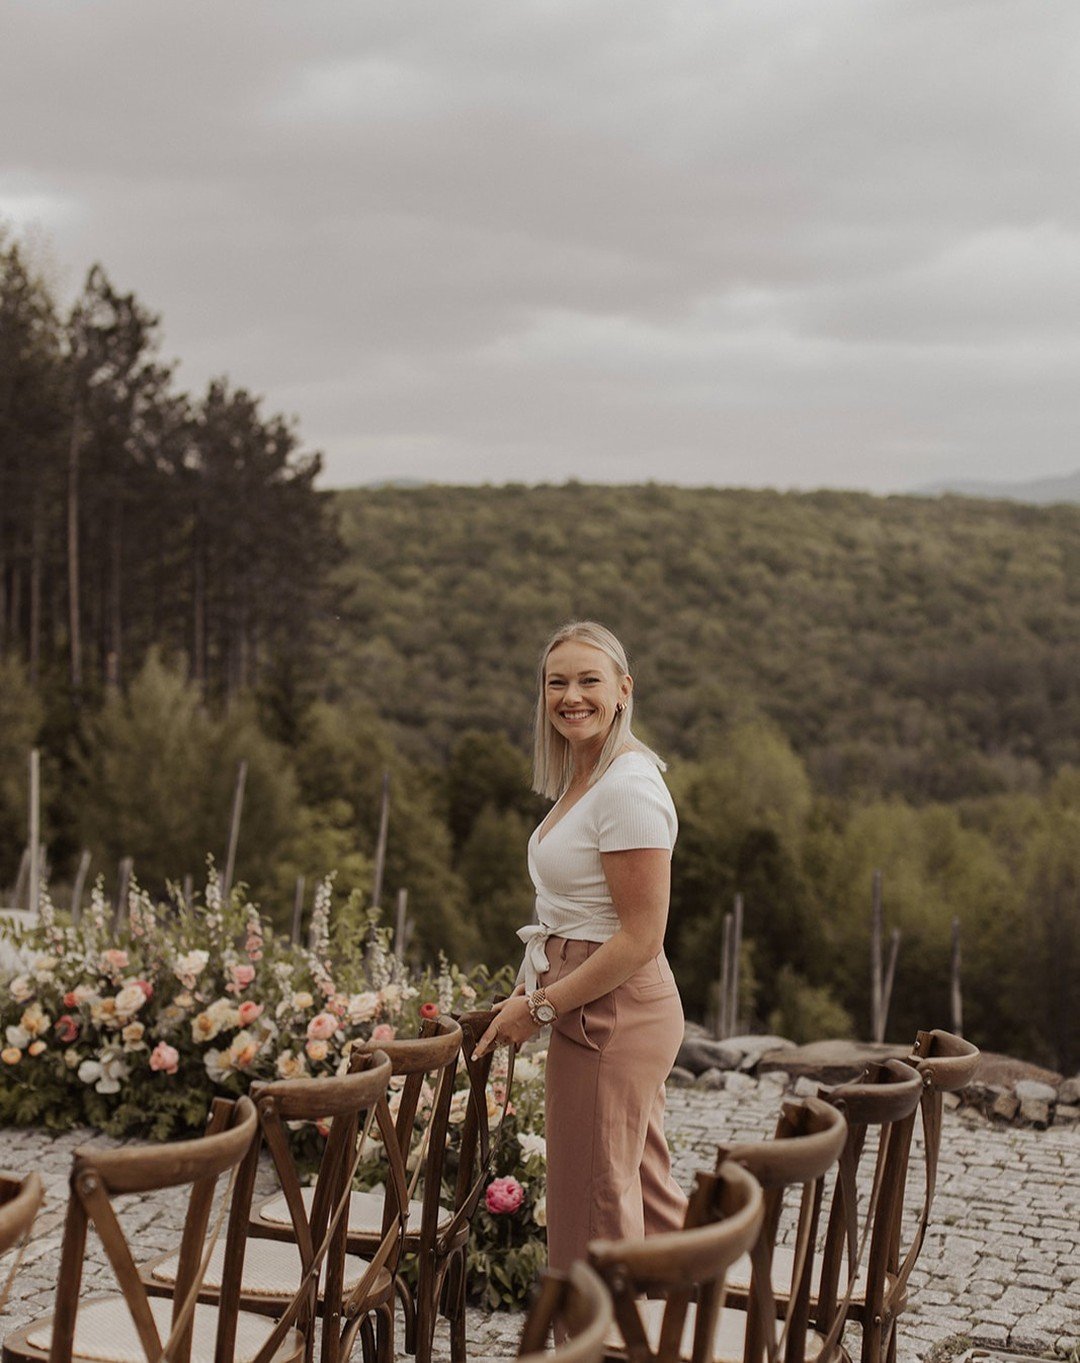 Hello ! I'm Paulina and I am so trilled to be part of such a significant milestone in your journey together. 

It is an incredible honor to be your wedding planner, and I am genuinely excited to help bring your vision for this special day to life in 